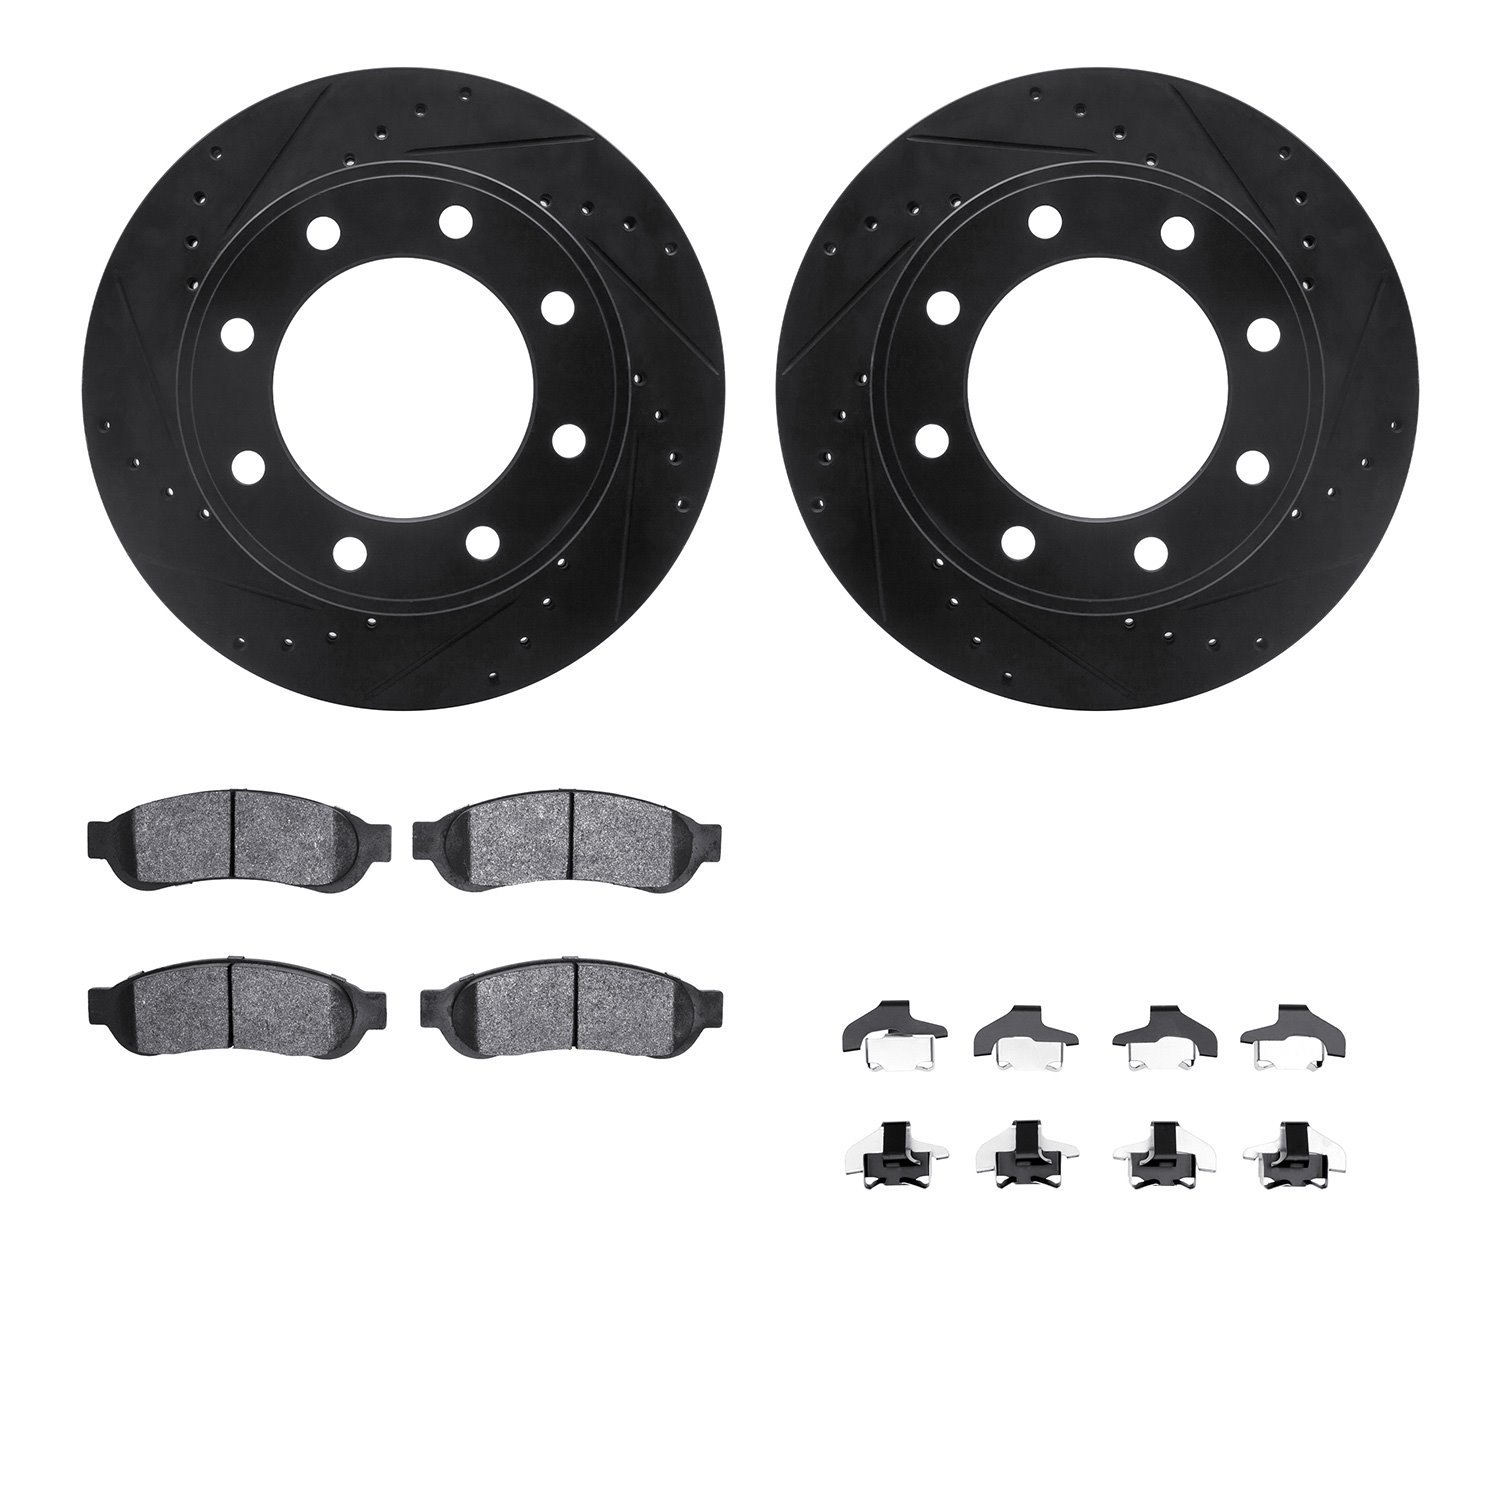 8412-54083 Drilled/Slotted Brake Rotors with Ultimate-Duty Brake Pads Kit & Hardware [Black], 2006-2010 Ford/Lincoln/Mercury/Maz